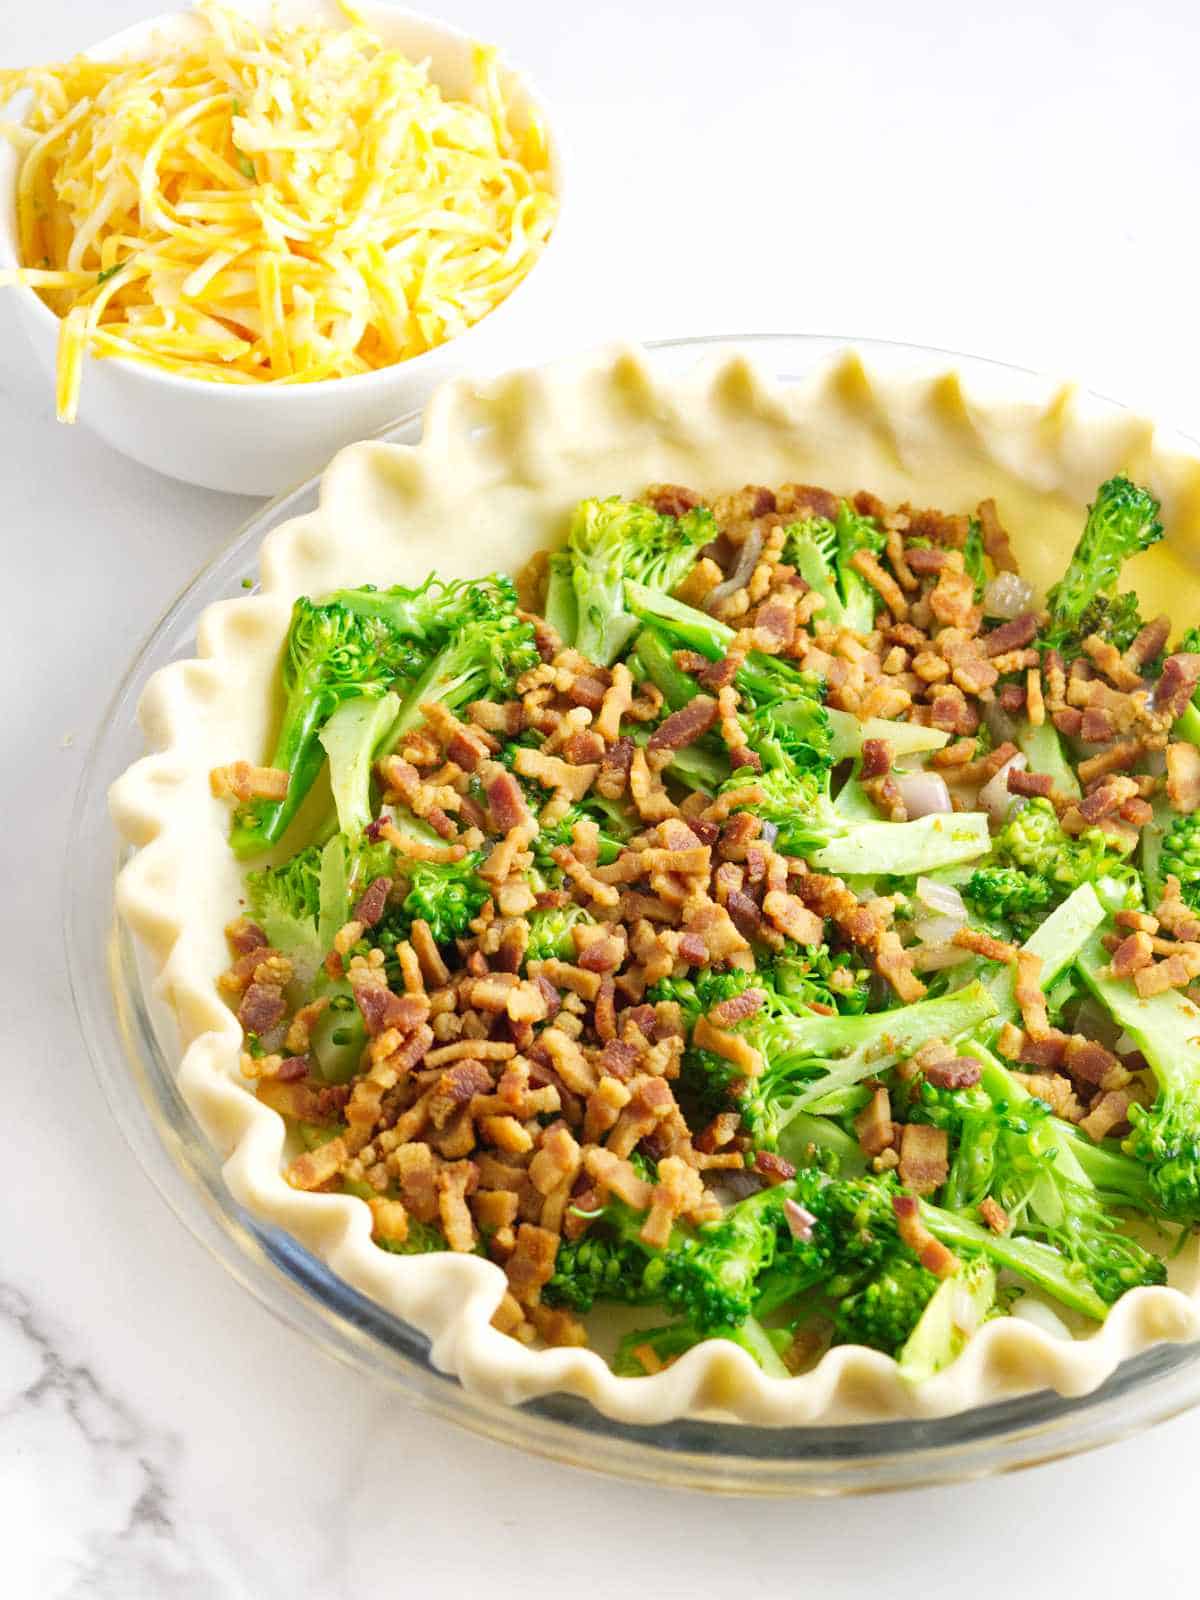 broccoli and bacon in a pie crust with cheese nearby.